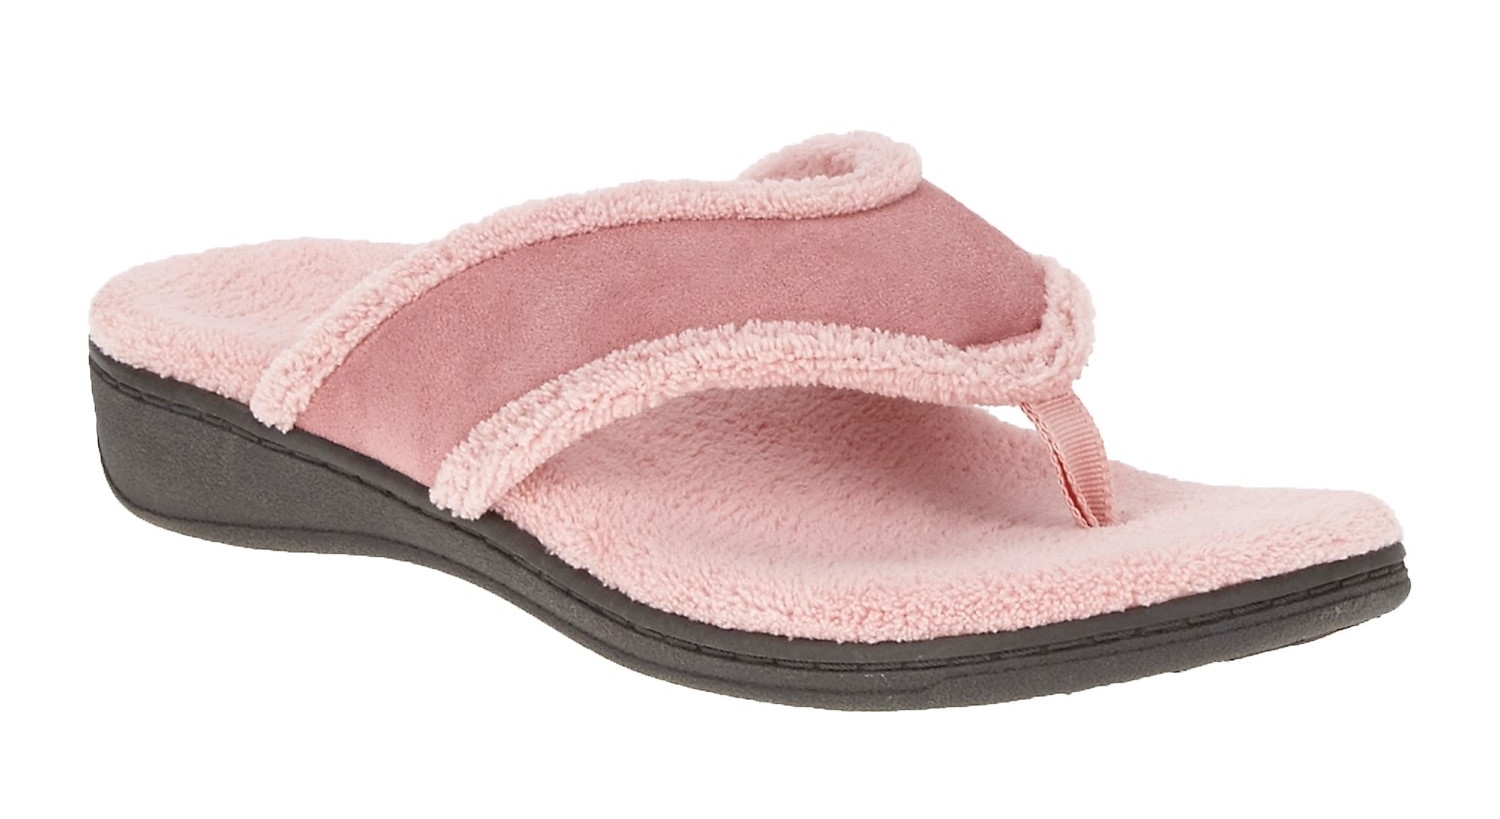 Cushioned Slippers For Hard Floors, House Shoes For Hardwood Floors